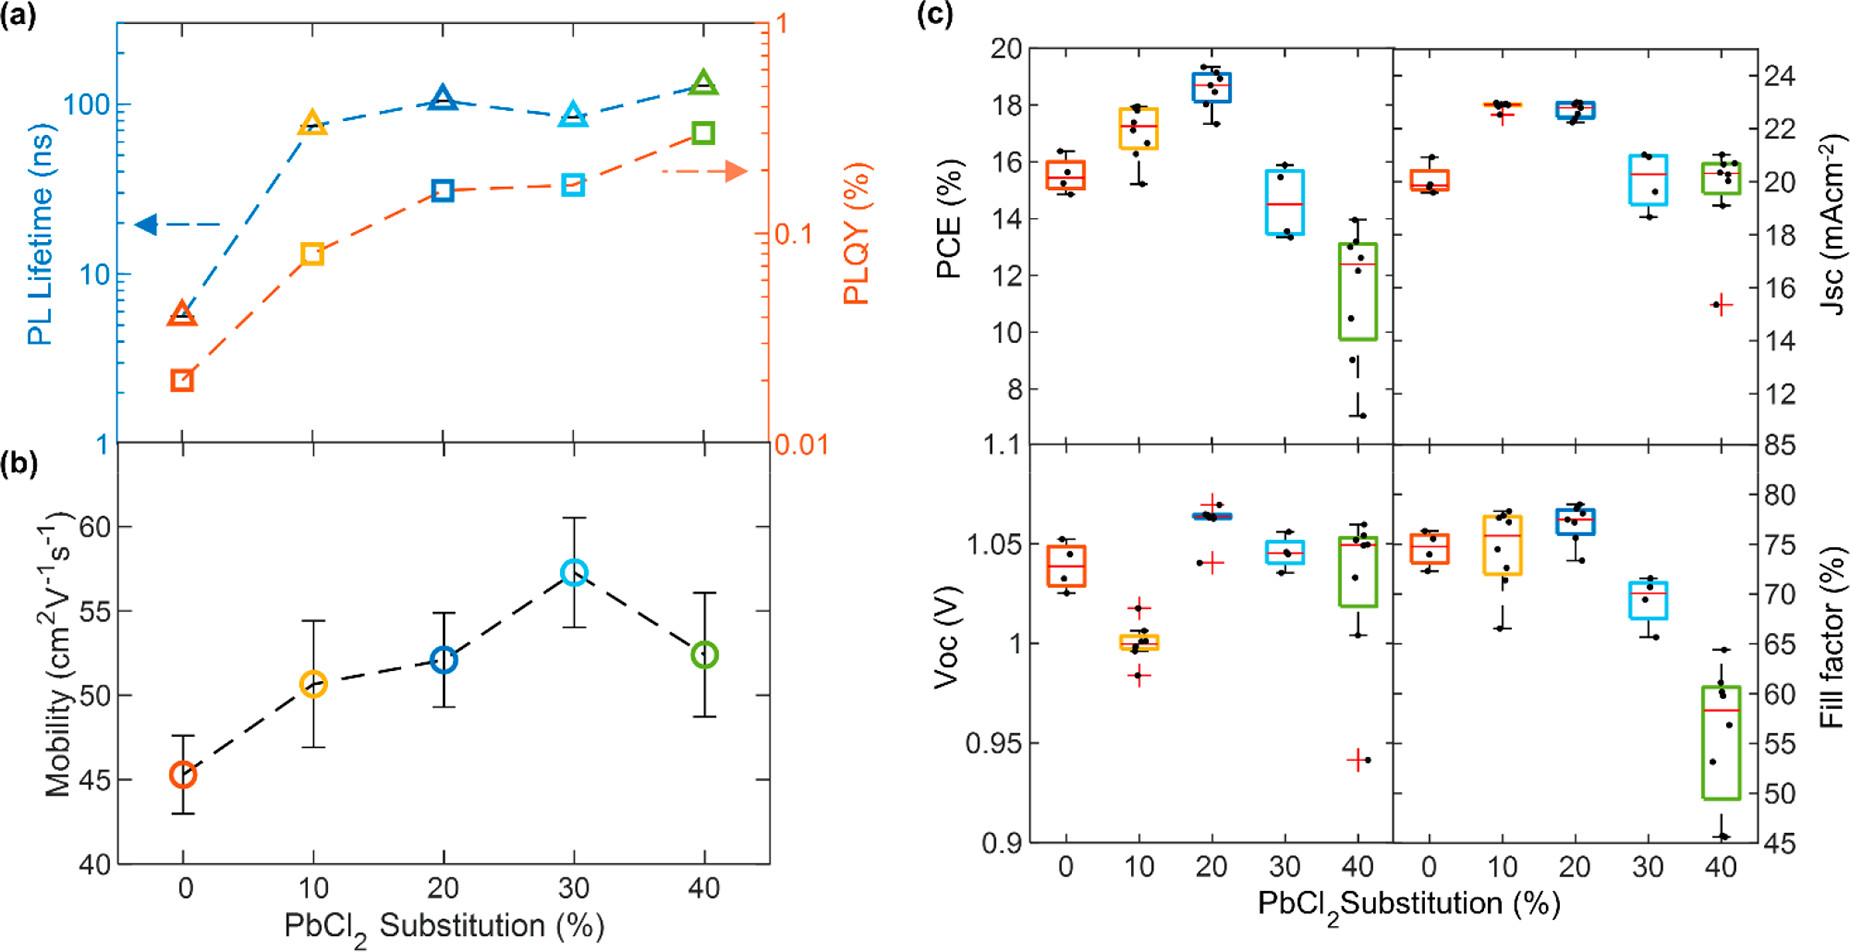 Evidence for defect passivation of FA1–yCsyPb(I1–xClx)3 thin films with Cl addition. (a) Photocarrier lifetimes (blue, left) and photoluminescence quantum yield (PLQY) (red, right) of FA1–yCsyPb(I1–xClx)3 thin films on z-cut quartz, grown with various amounts of PbI2 substituted with PbCl2. The lifetimes were obtained from stretched exponential fits to time-resolved photoluminescence (TRPL) traces, which were obtained by photoexciting the samples with a 1 MHz pulsed 470 nm laser with a fluence of 20 µJ/cm2. The PLQY was obtained through 532 nm photoexcitation at 24 mW cm–2 intensity. (b) Charge-carrier mobilities obtained from optical-pump THz-probe spectroscopy done on the aforementioned bare films. Additional experimental details can be found in the Supporting Information. (c) Current–voltage (J–V) characteristics for reverse scans of 0.25 cm2 and 1 cm2 devices made from the aforementioned FA1–yCsyPb(I1–xClx)3, tested under simulated AM1.5 solar irradiance. The solar cells were made with the following p-i-n structure ITO/PTAA/perovskite/C60/BCP/Ag.